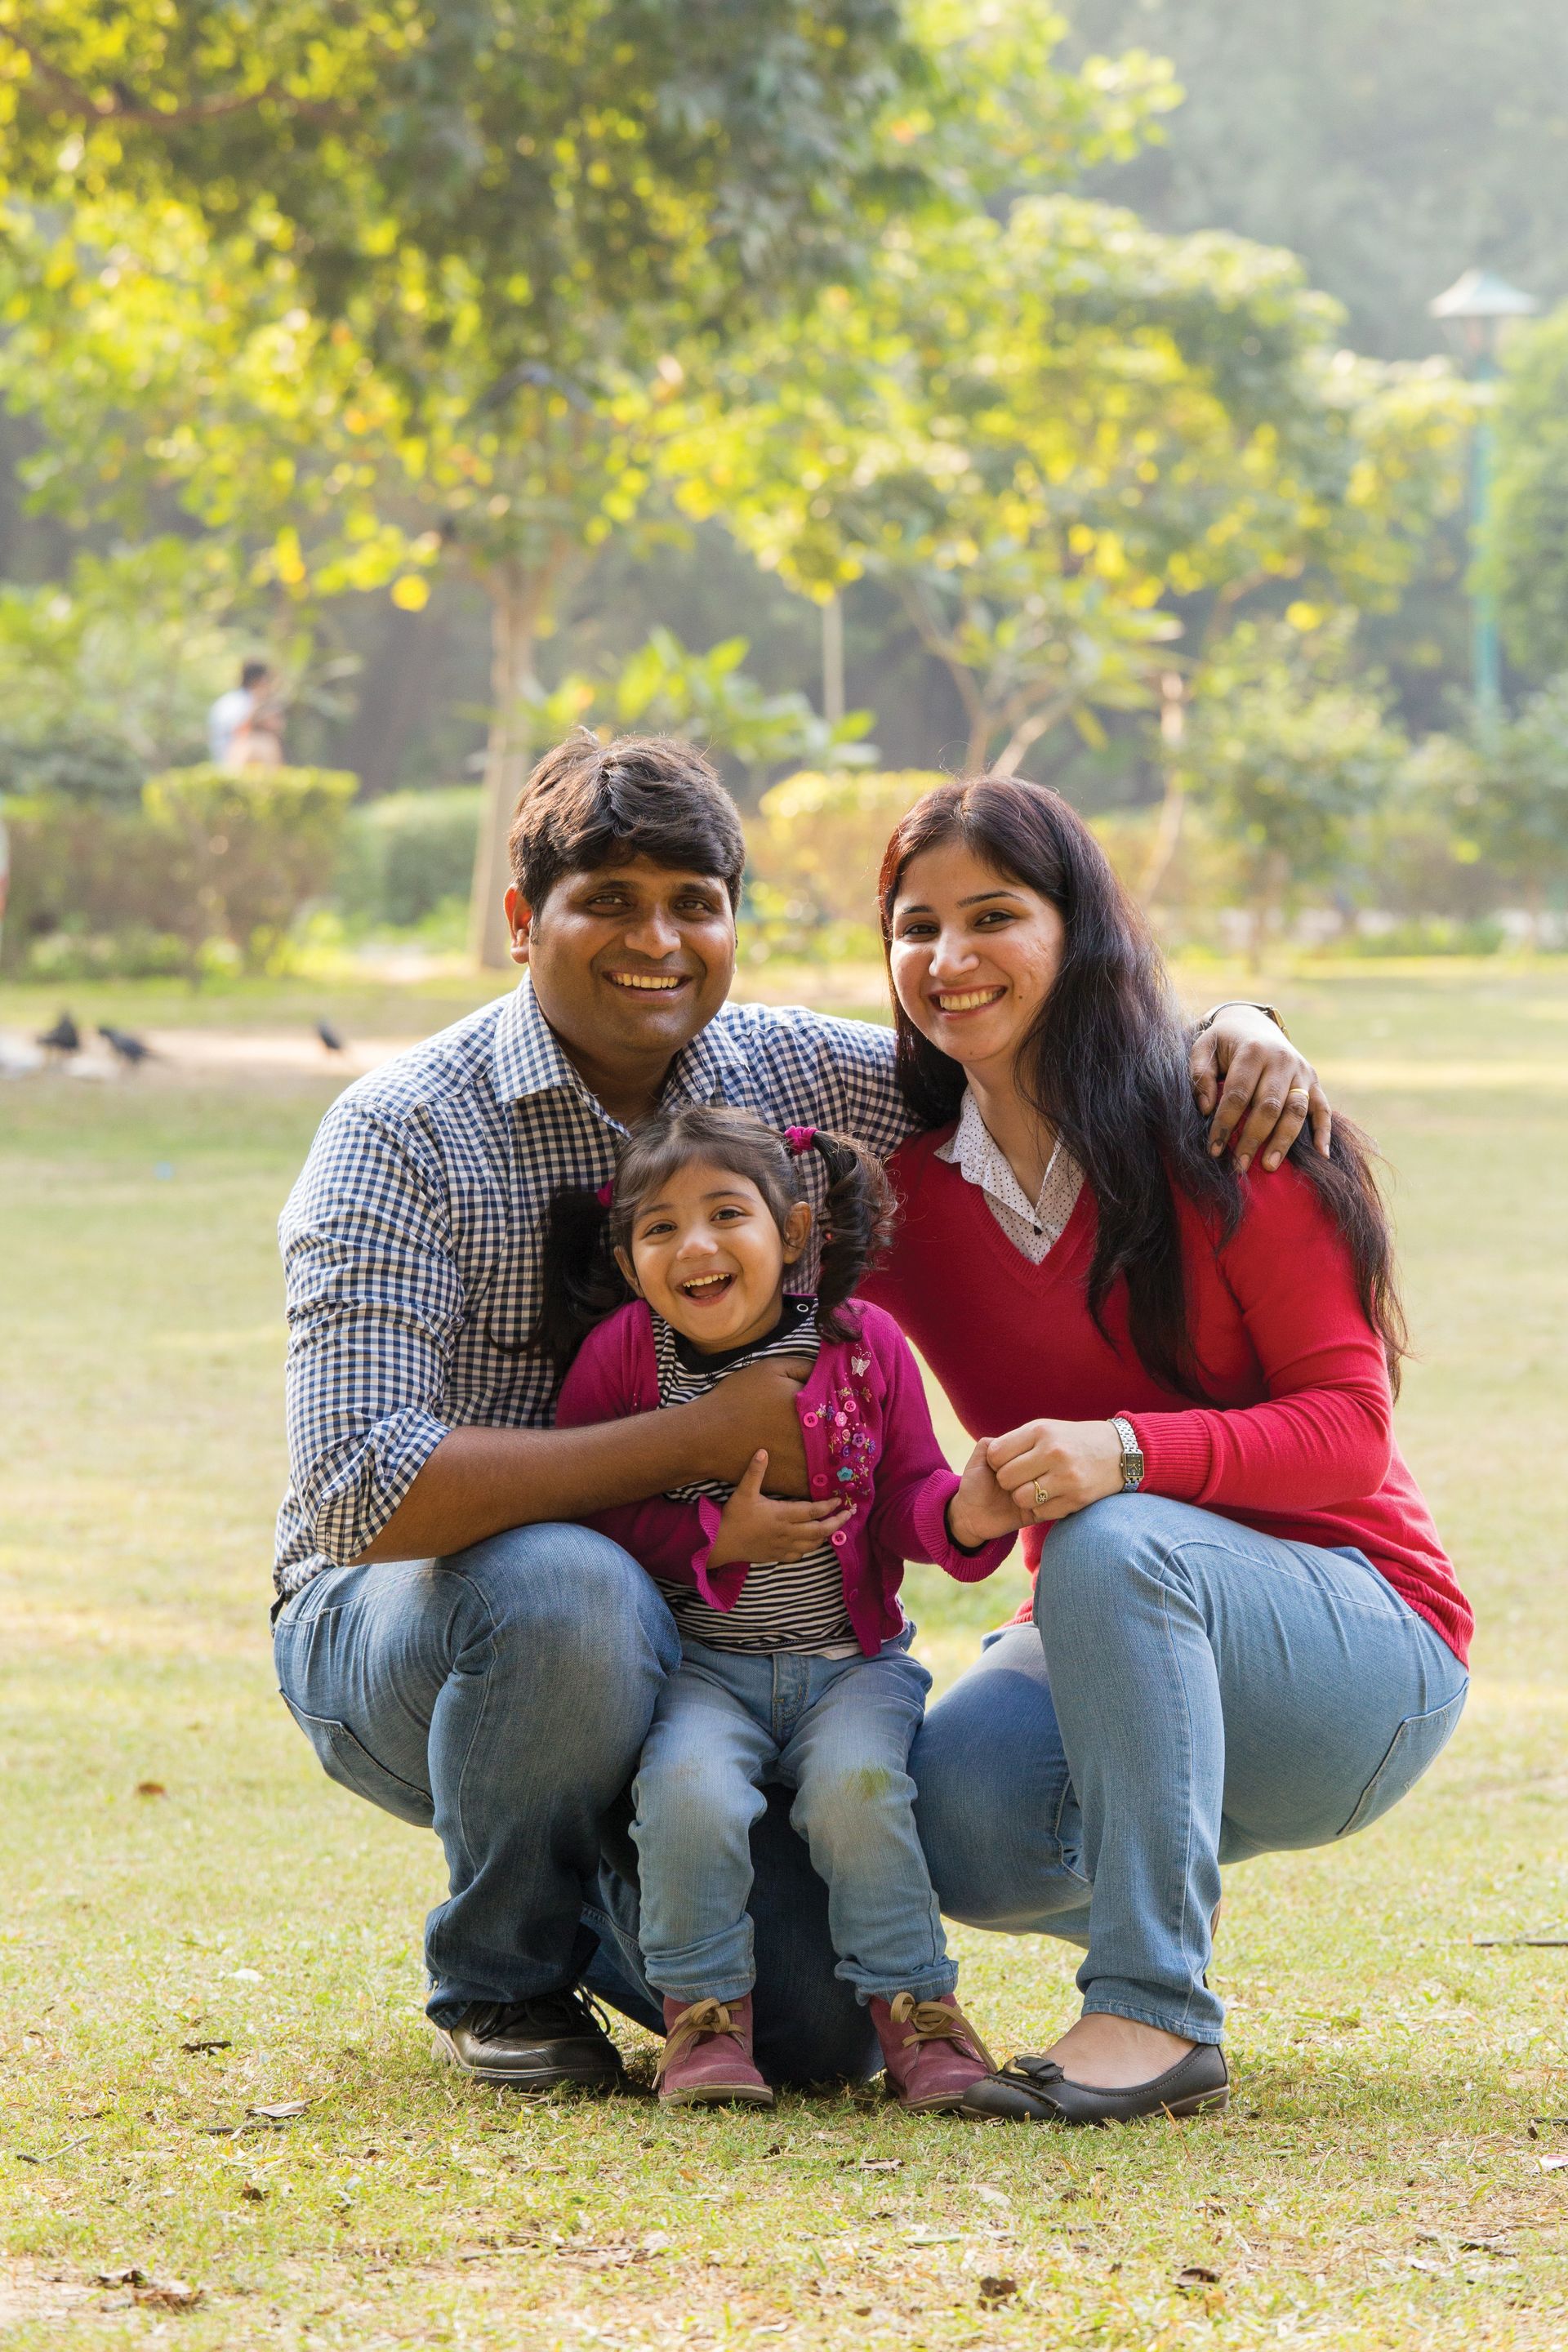 A young family from India at the park together.